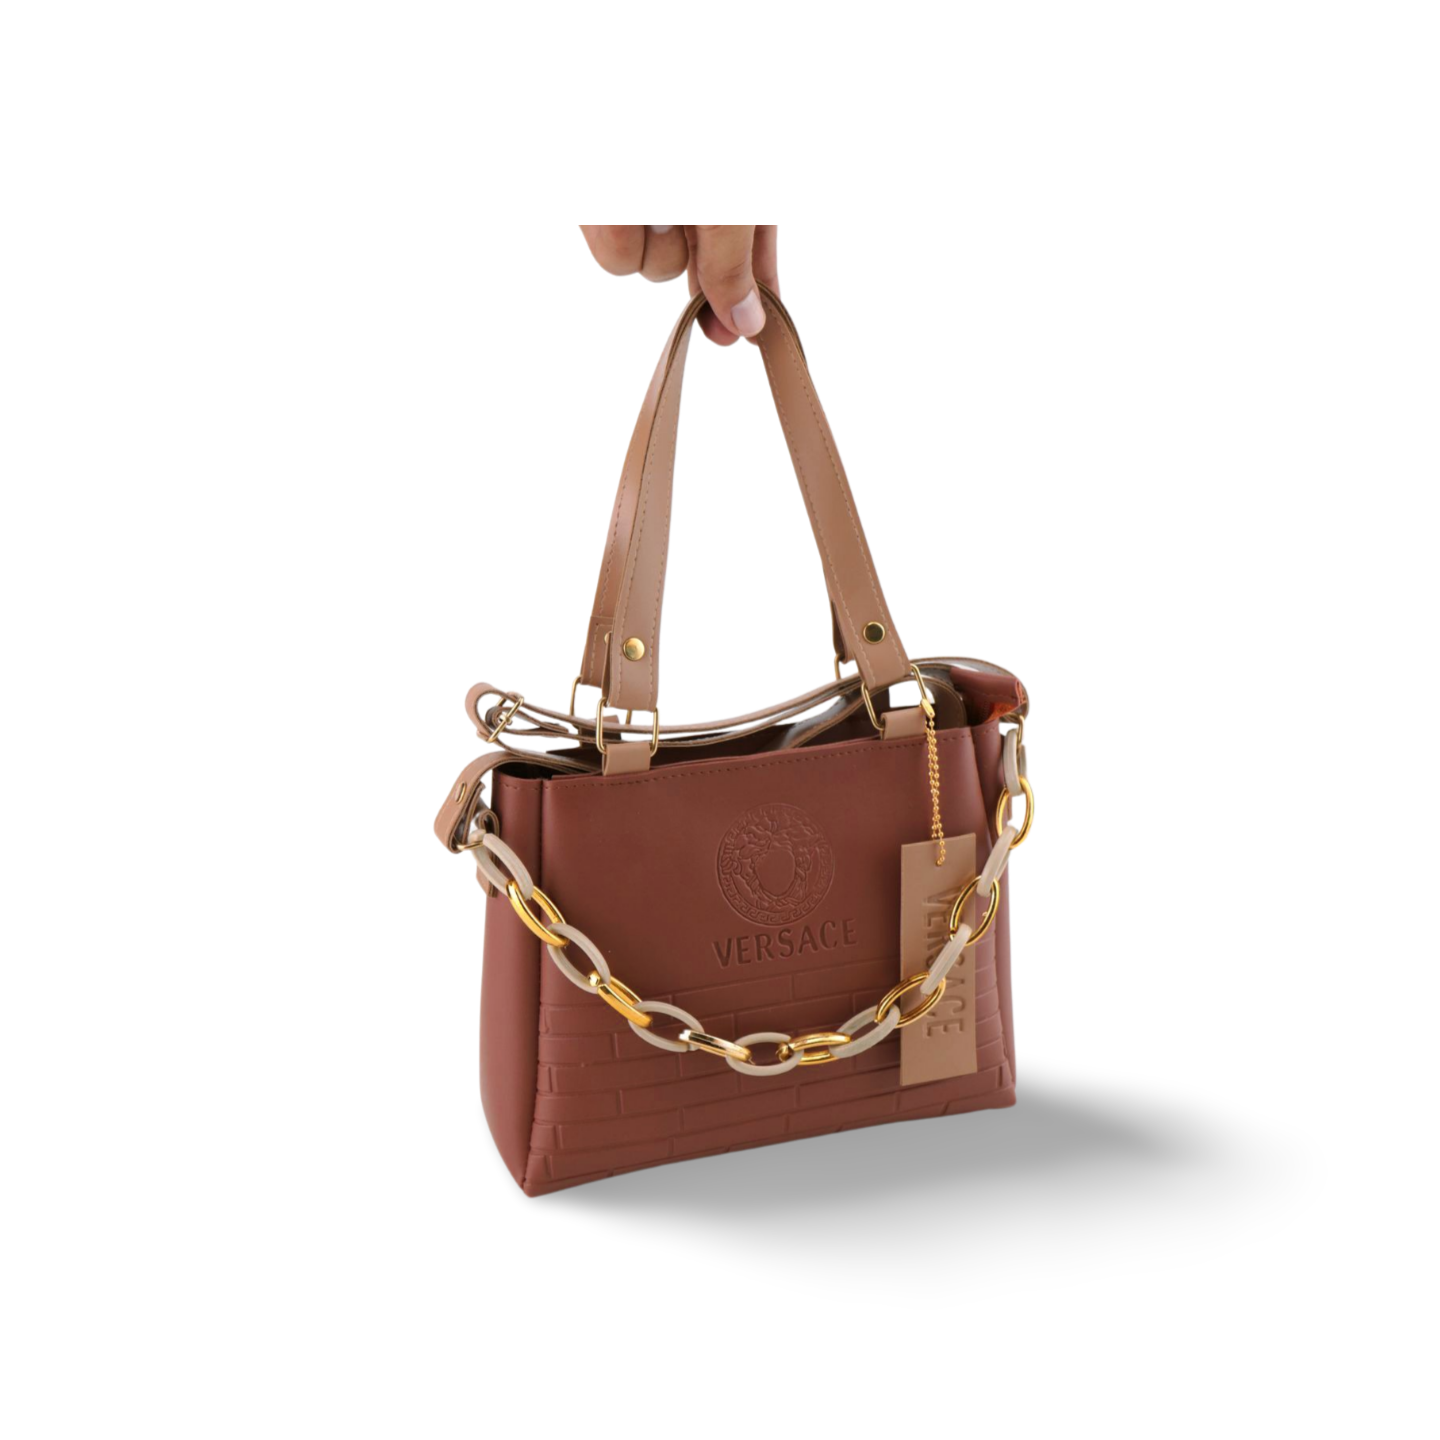 Stylish Small Chain Shoulder Bag with Gold-Tone Chain Strap